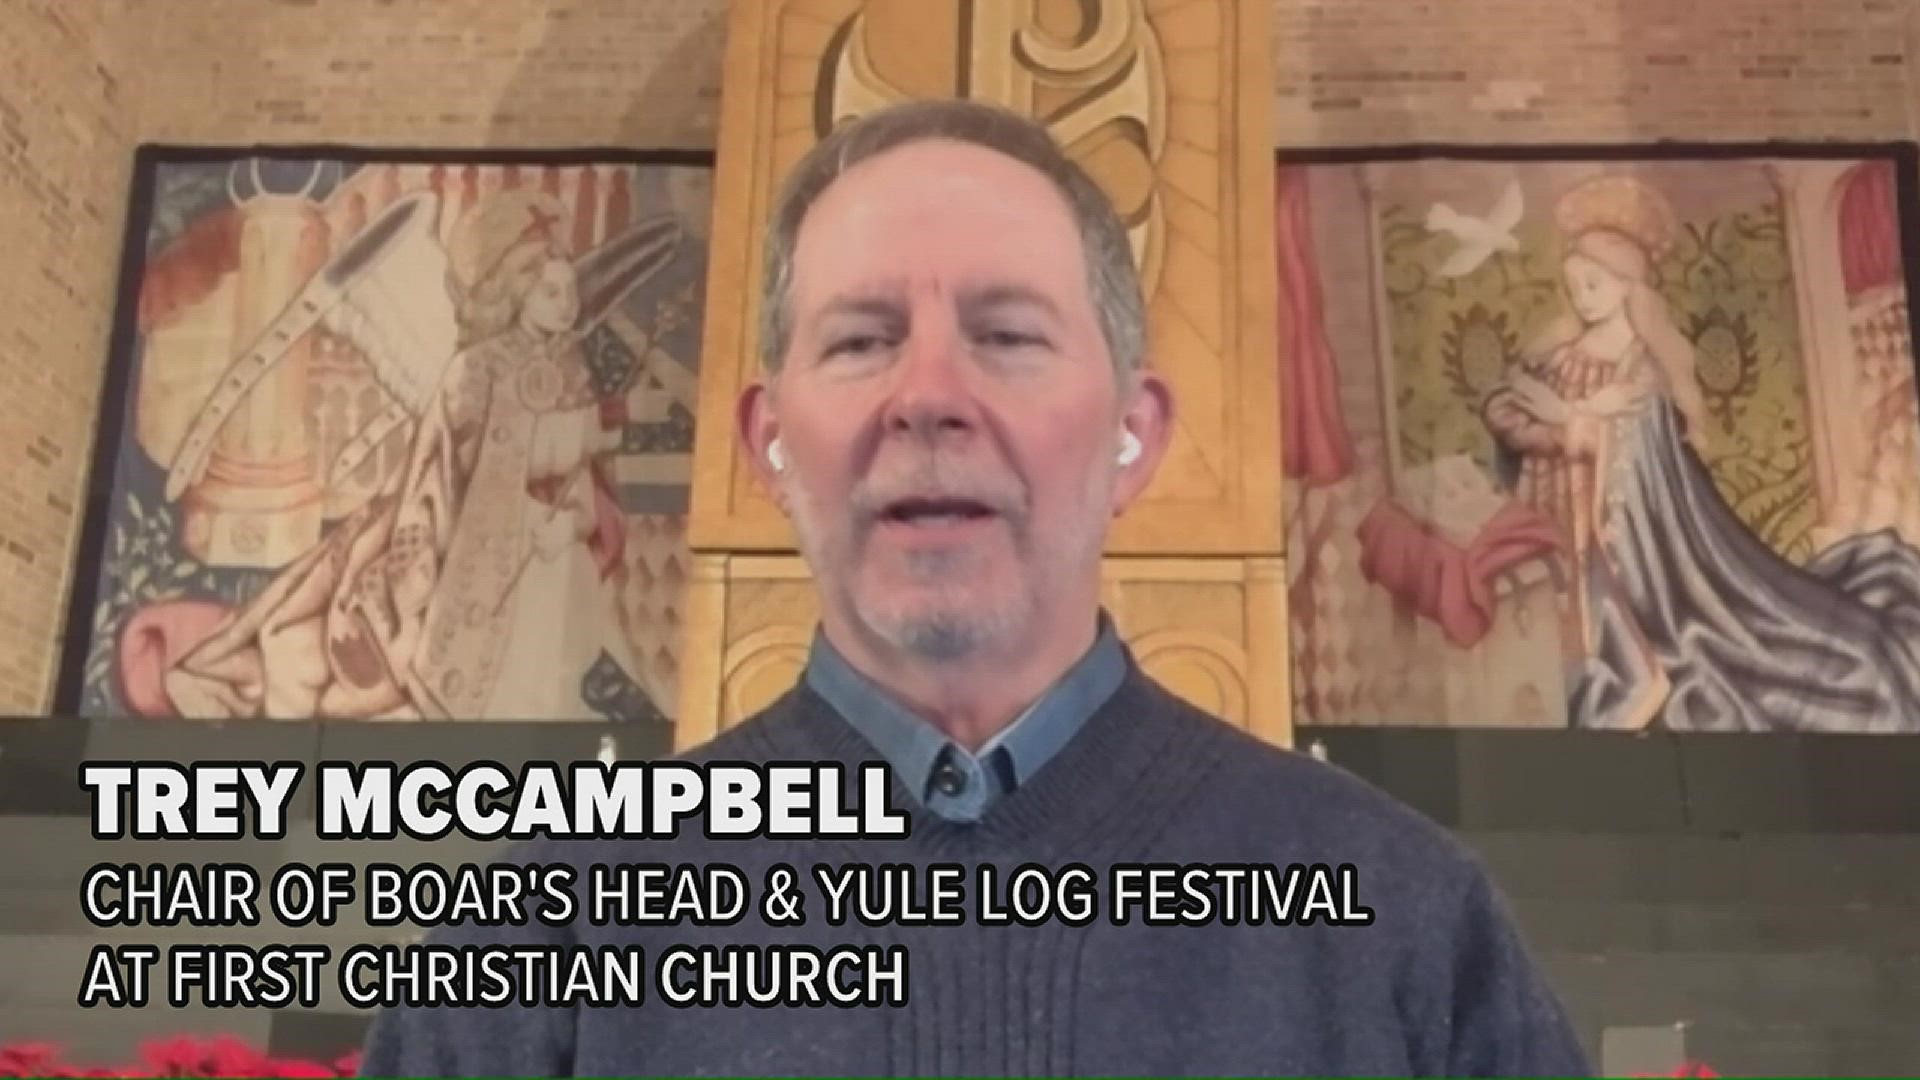 Chair of the Boar's Head & Yule Log Festival Trey McCampbell joined Domingo Live to tell the fantastical and poignant story of the festival's origins.